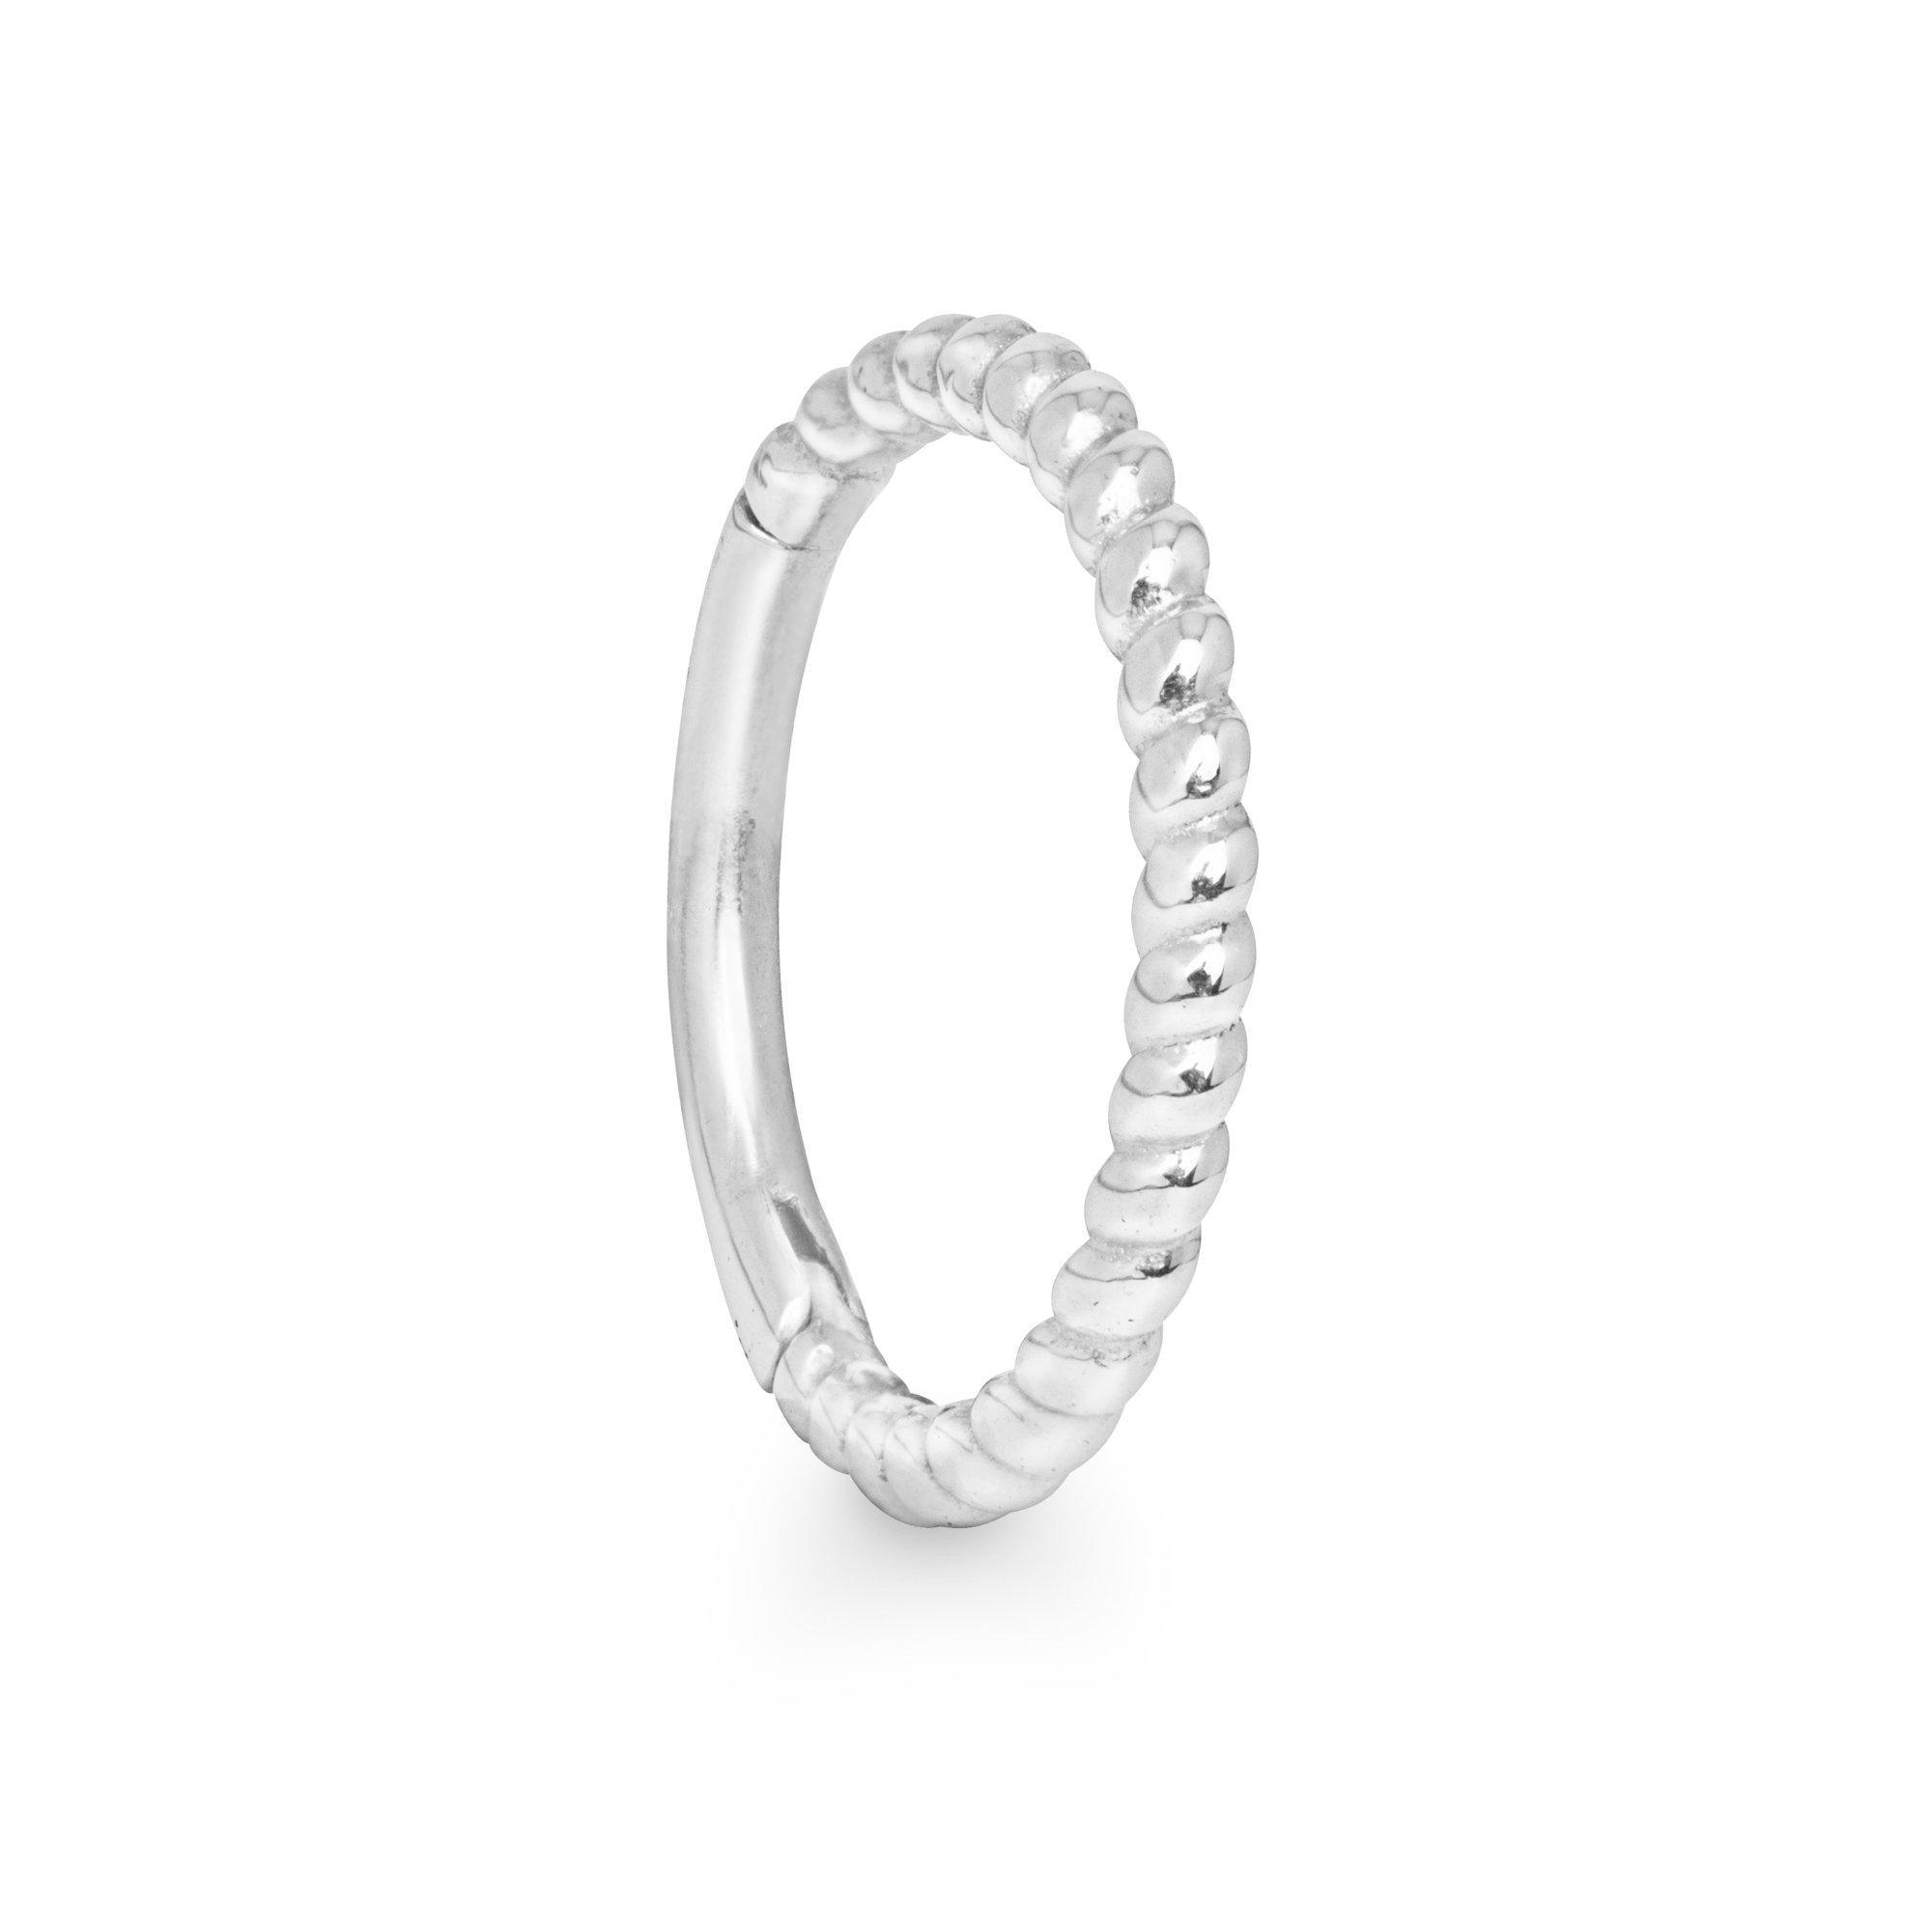 Trenza 14k solid white gold braided single hoop earring - Helix & Conch